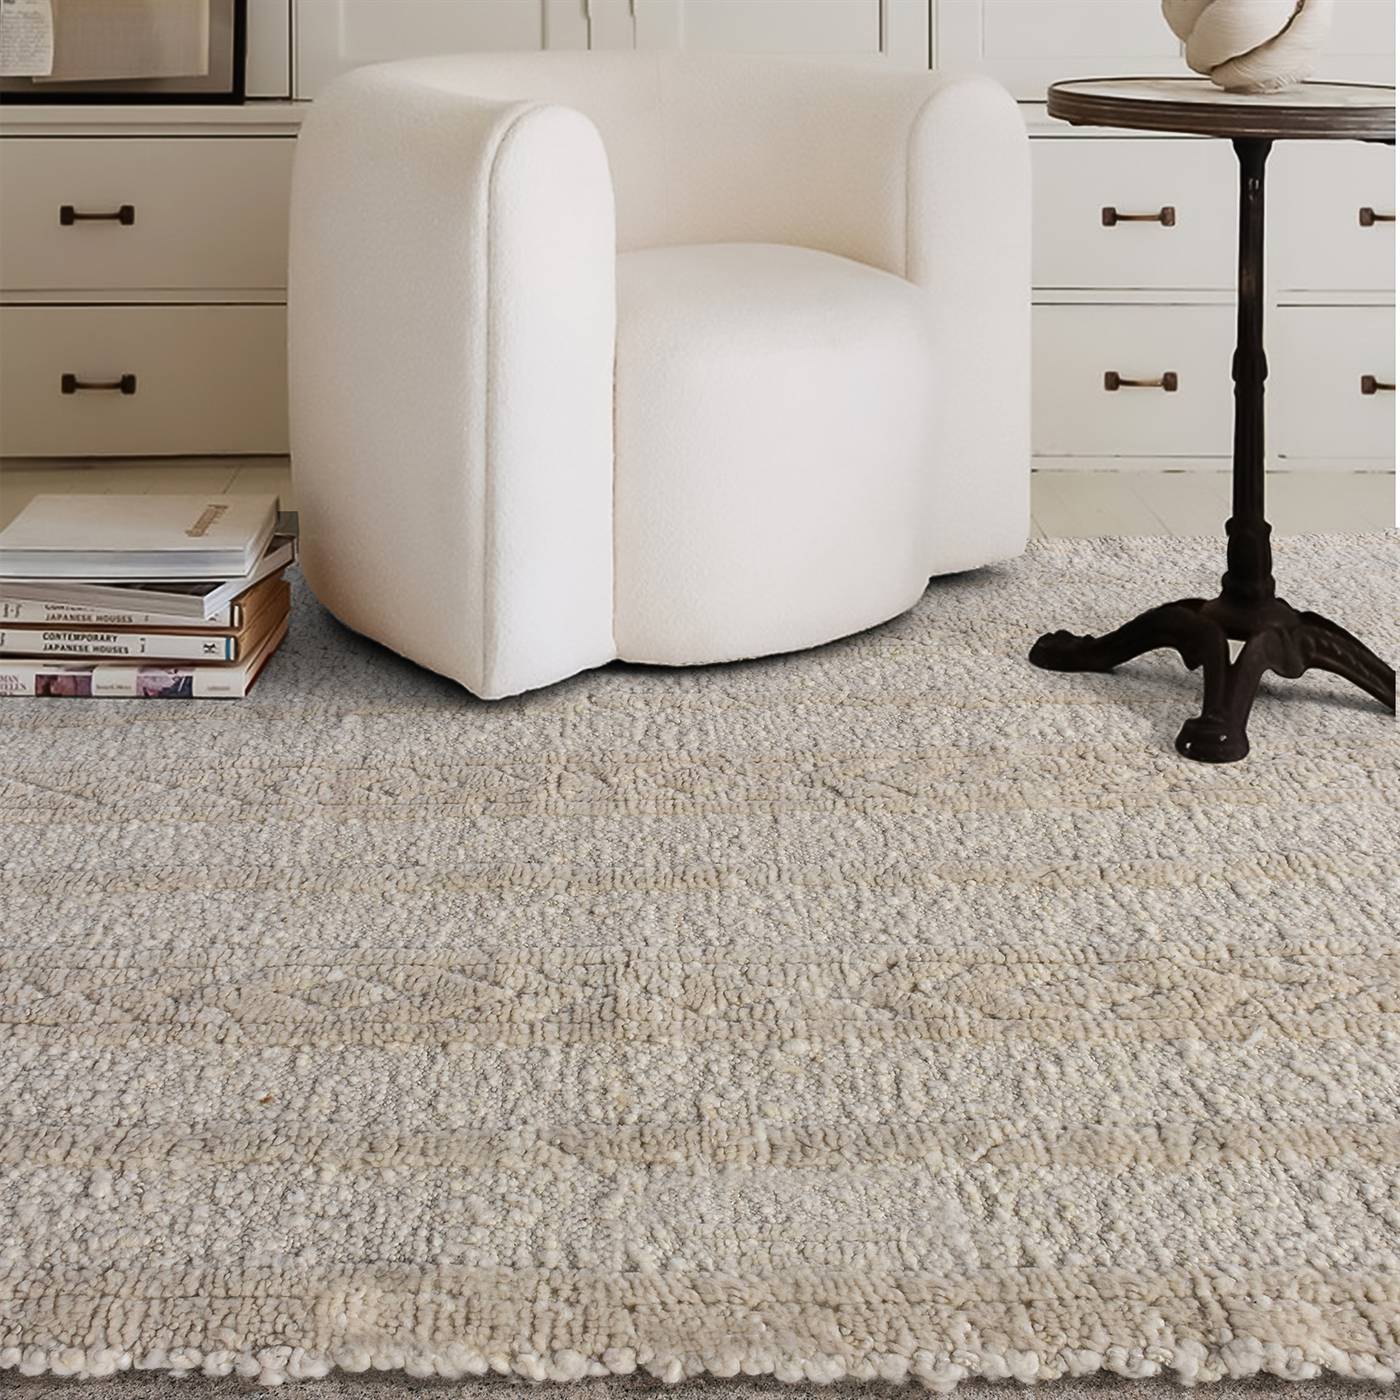 Area Rug, Bedroom Rug, Living Room Rug, Living Area Rug, Indian Rug, Office Carpet, Office Rug, Shop Rug Online, Natural White, Wool, Hand Knotted , Handknotted, All Cut, Intricate 